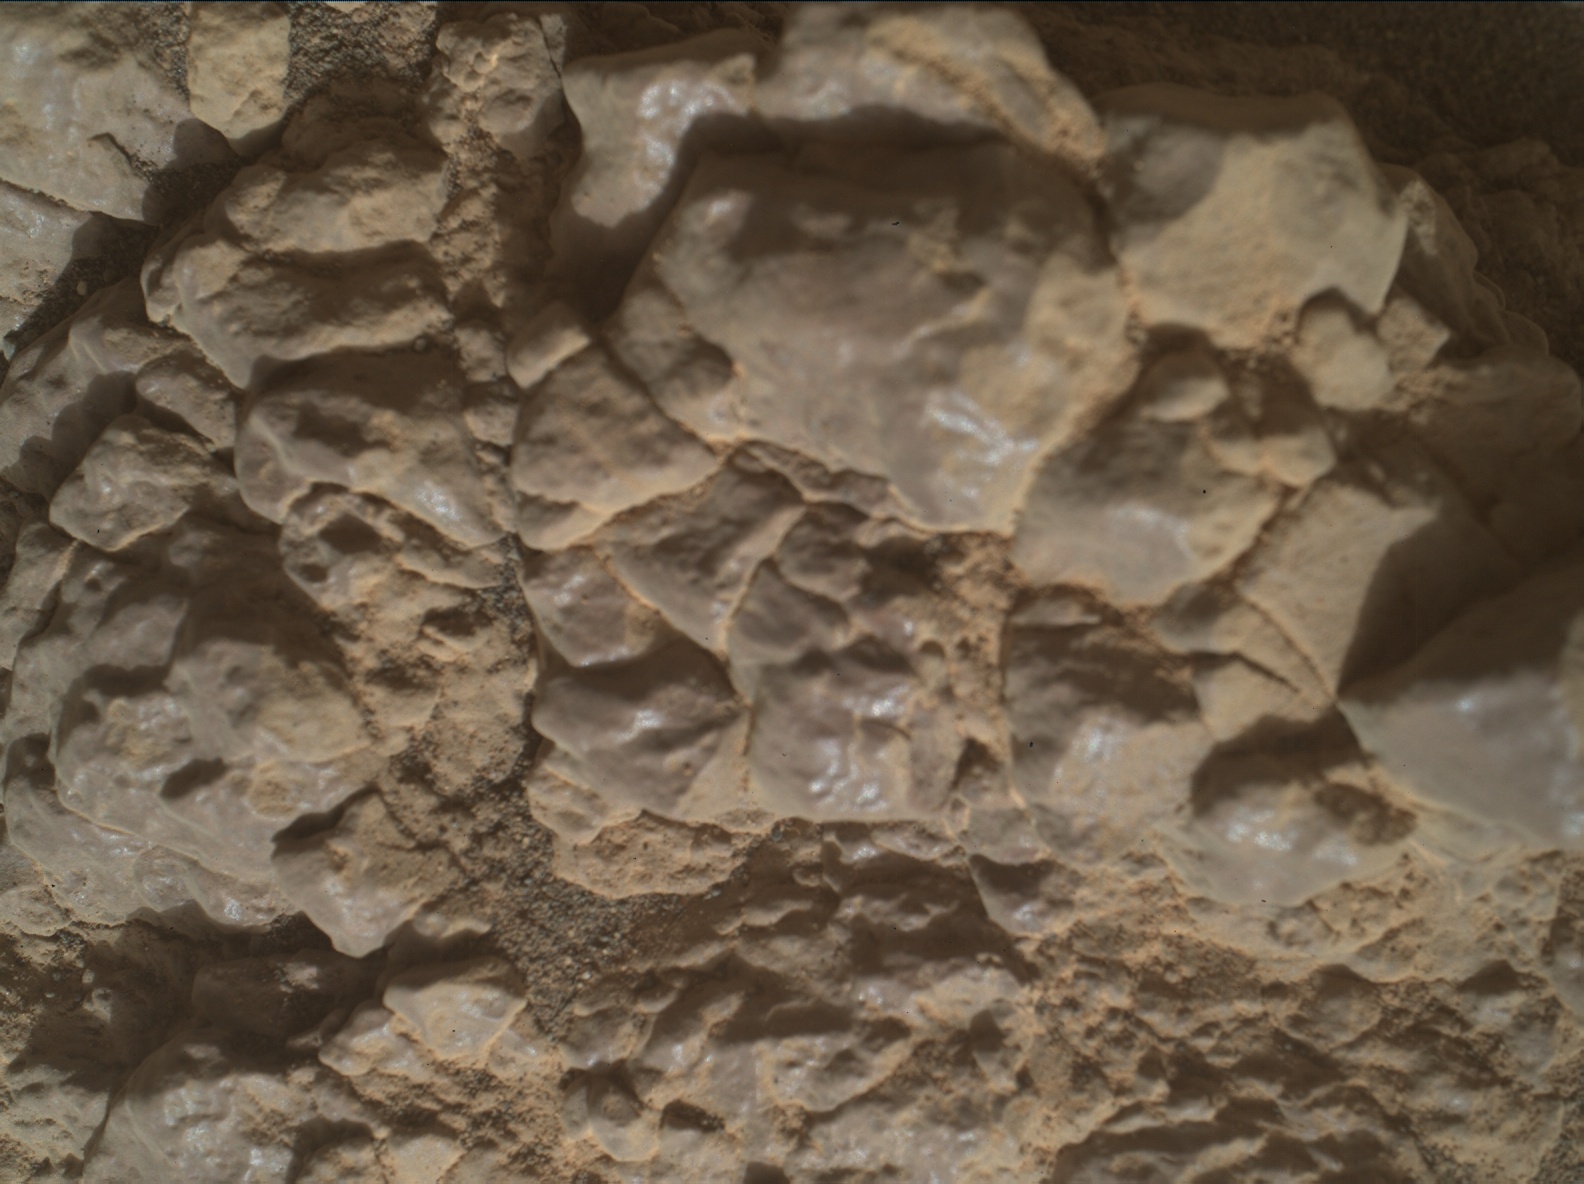 Nasa's Mars rover Curiosity acquired this image using its Mars Hand Lens Imager (MAHLI) on Sol 2591